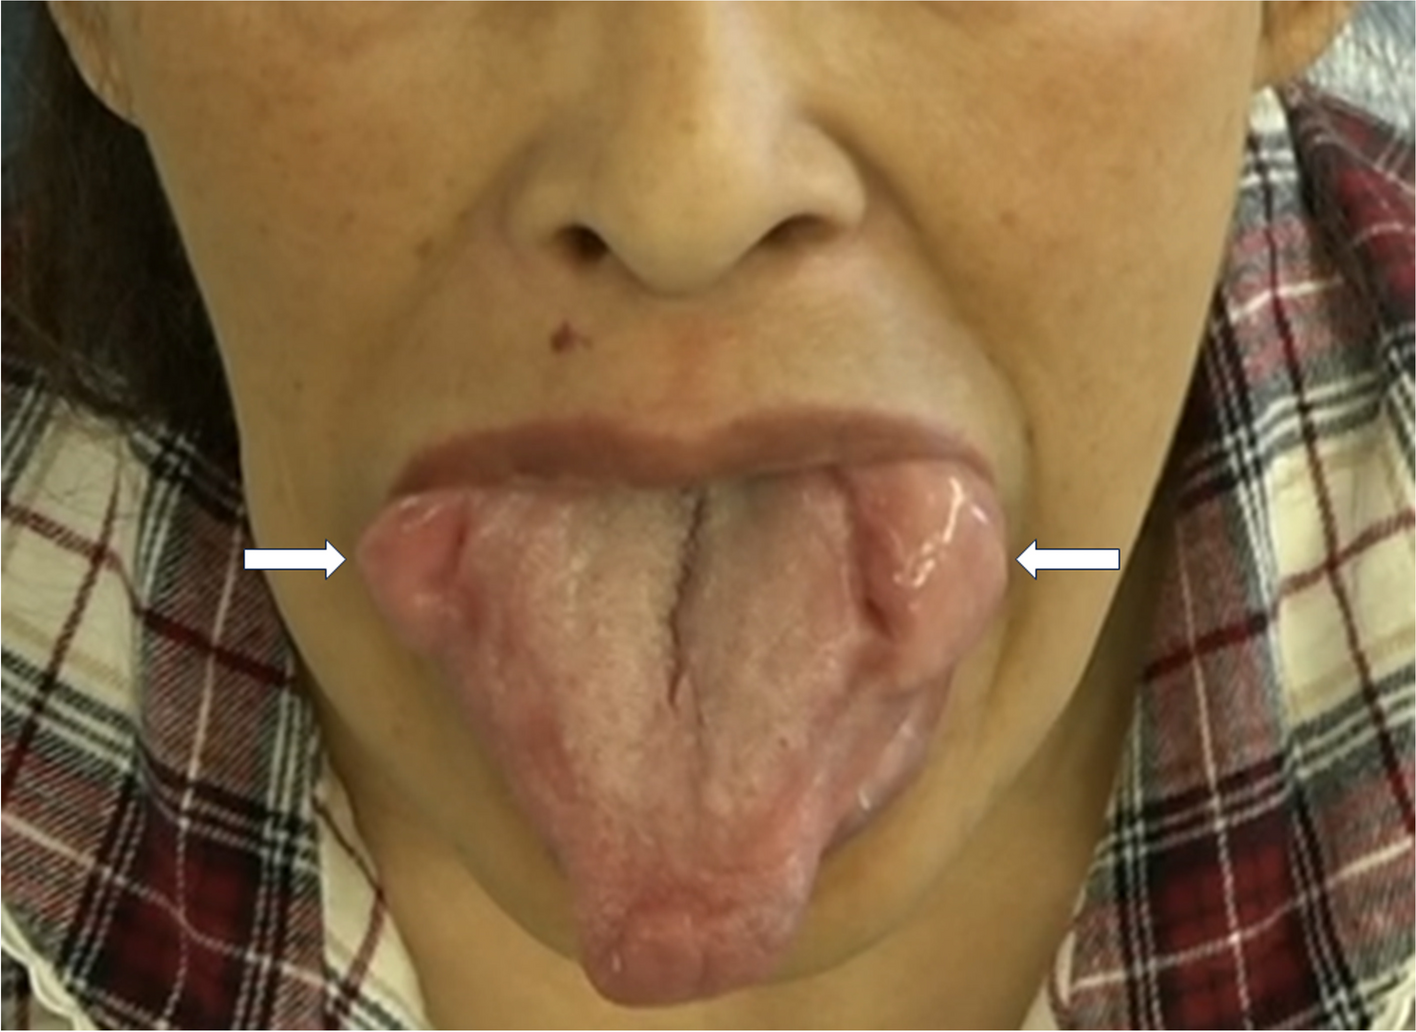 Fragile lip in a patient with macroglossia due to hemodialysis-associated amyloidosis